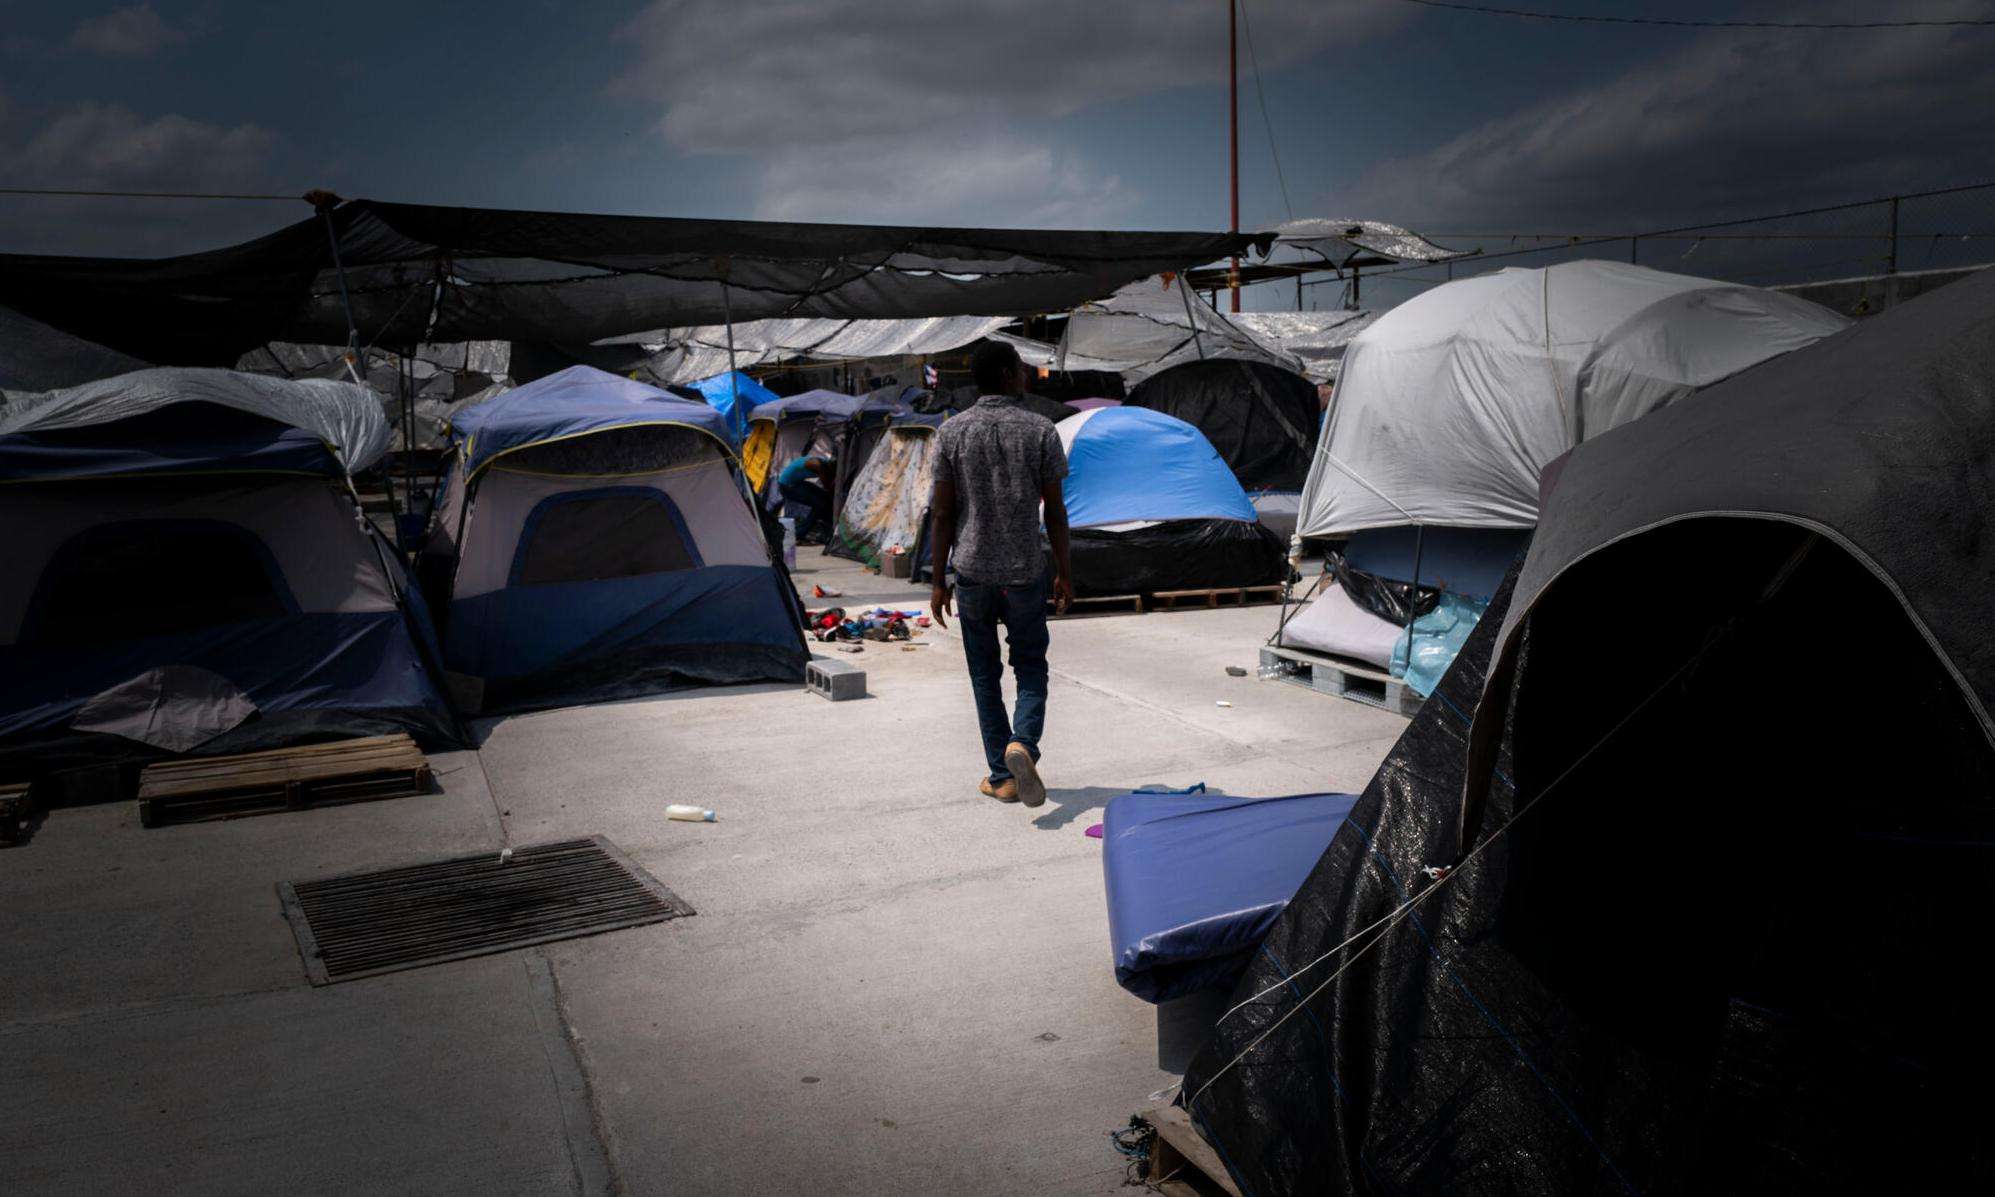 A man walks through the "Senda de Vida" migrant shelter in Reynosa, Mexico, at the US southern border. Hundreds of families relocated to this shelter in May 2022 after a camp that had formed in a public plaza was evacuated and cleared away. At the time, two thousand people were living in the camp, including hundreds of children.